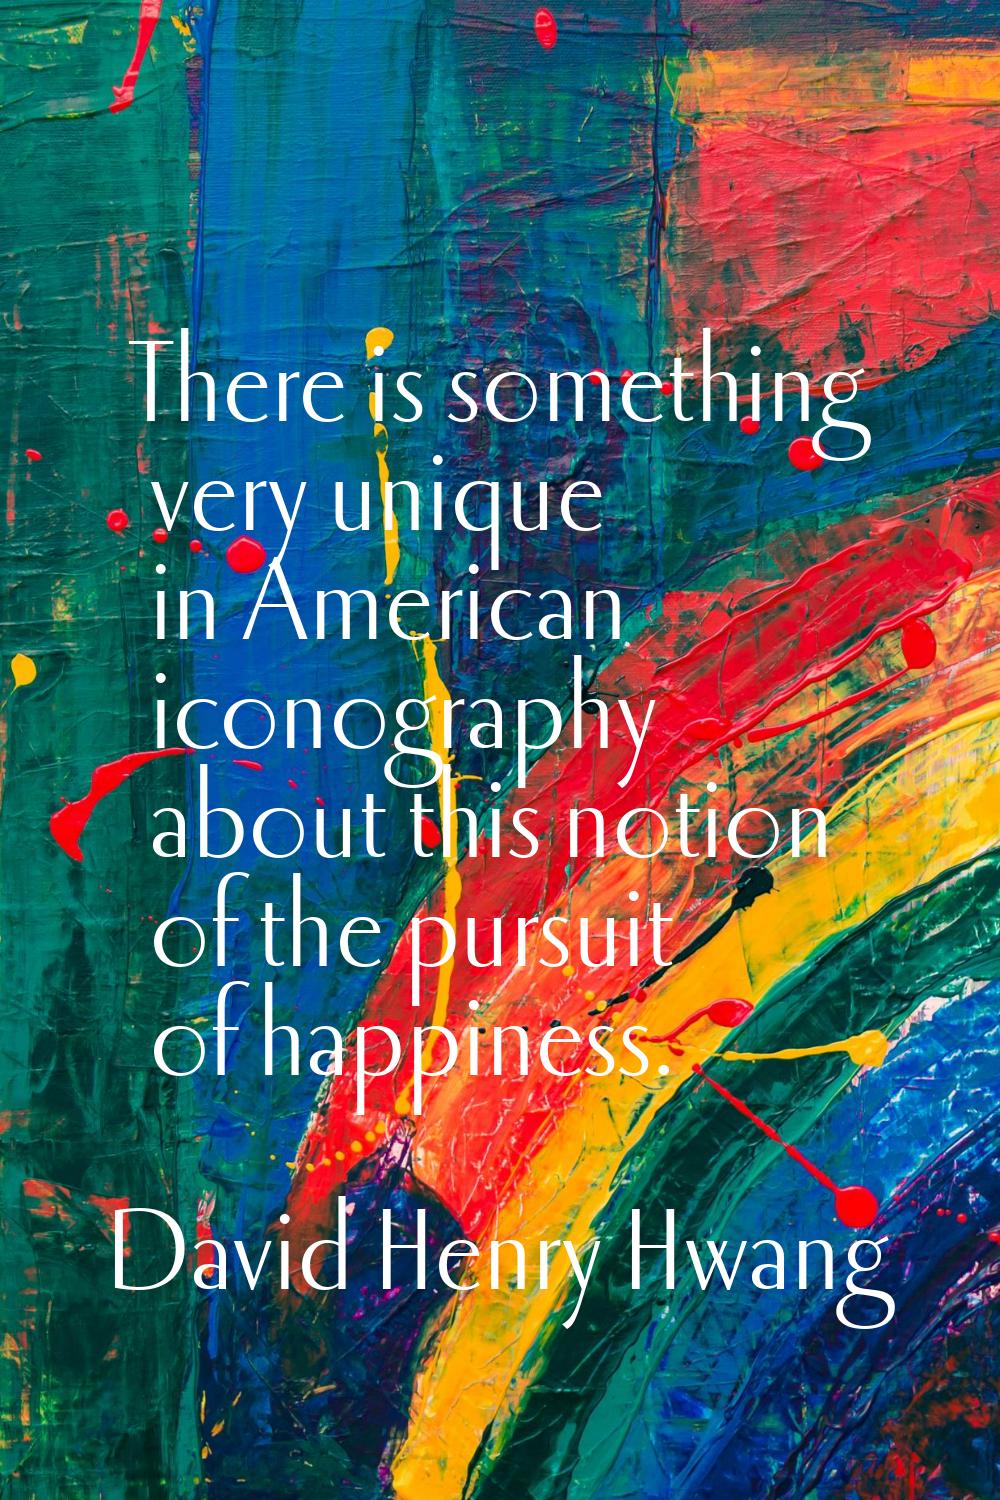 There is something very unique in American iconography about this notion of the pursuit of happines